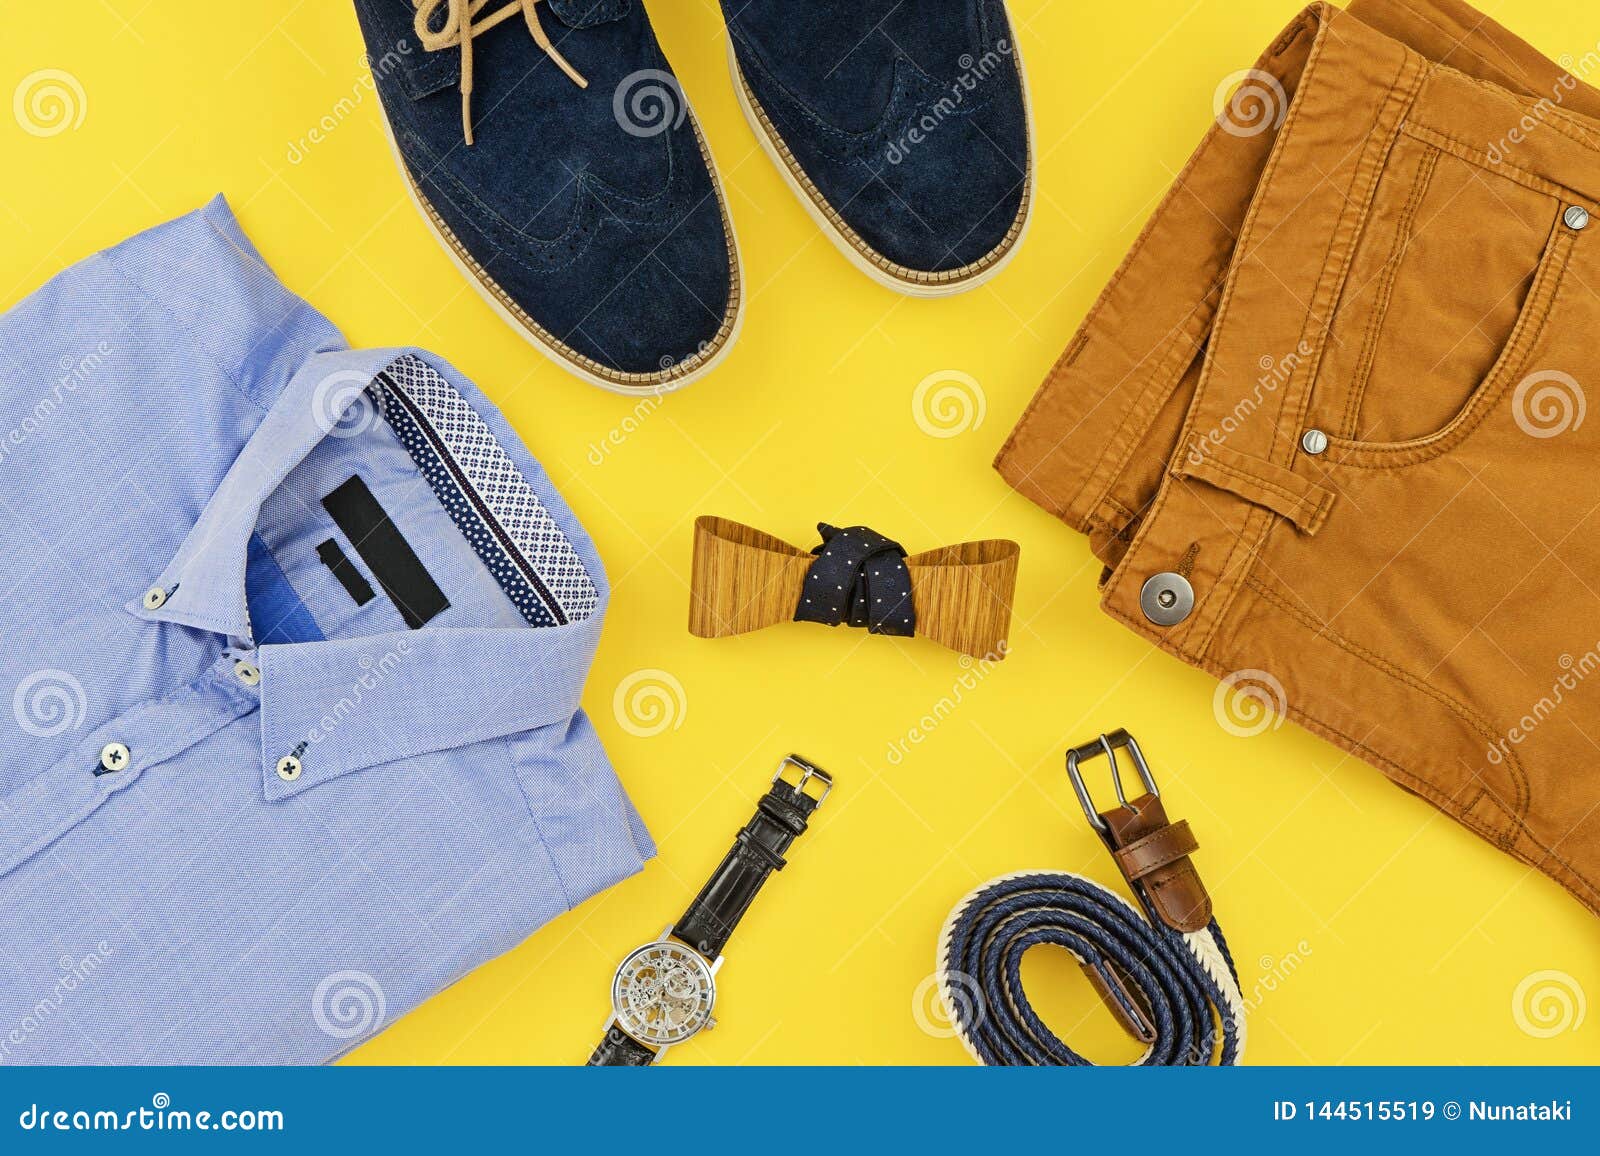 Men's Fashion Clothing Shoes & Accessories